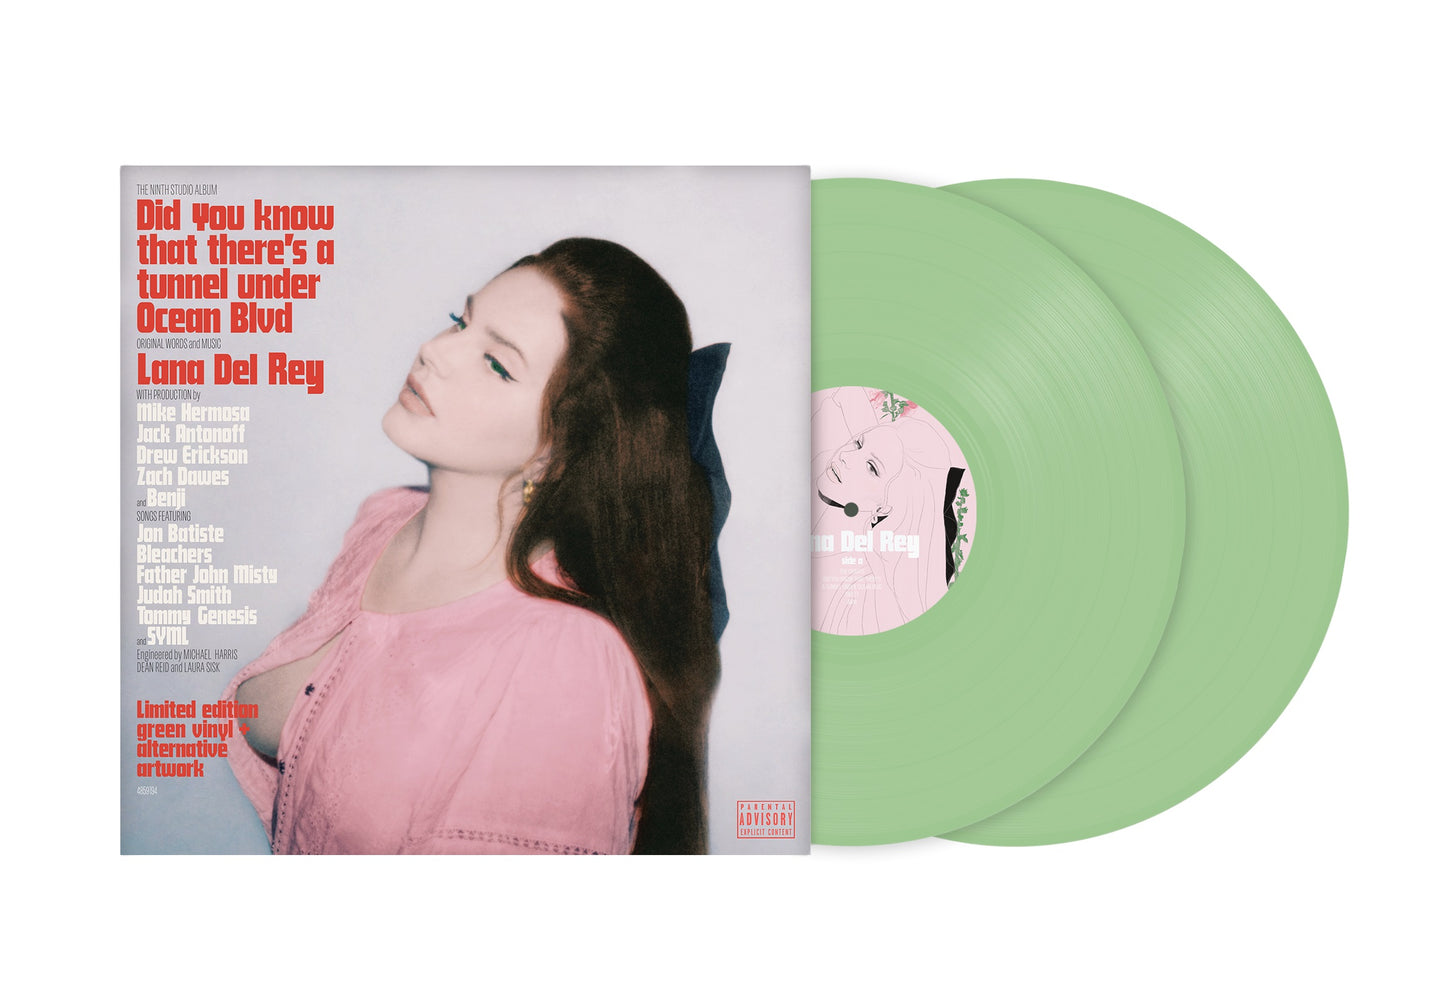 Lana Del Rey - Did You Know That There's A Tunnel Under Ocean Blvd (Alt. Cover) [Explicit Content] (Indie Exclusive, Limited Edition, Colored Vinyl, Green) (2 Lp's) (LP) M